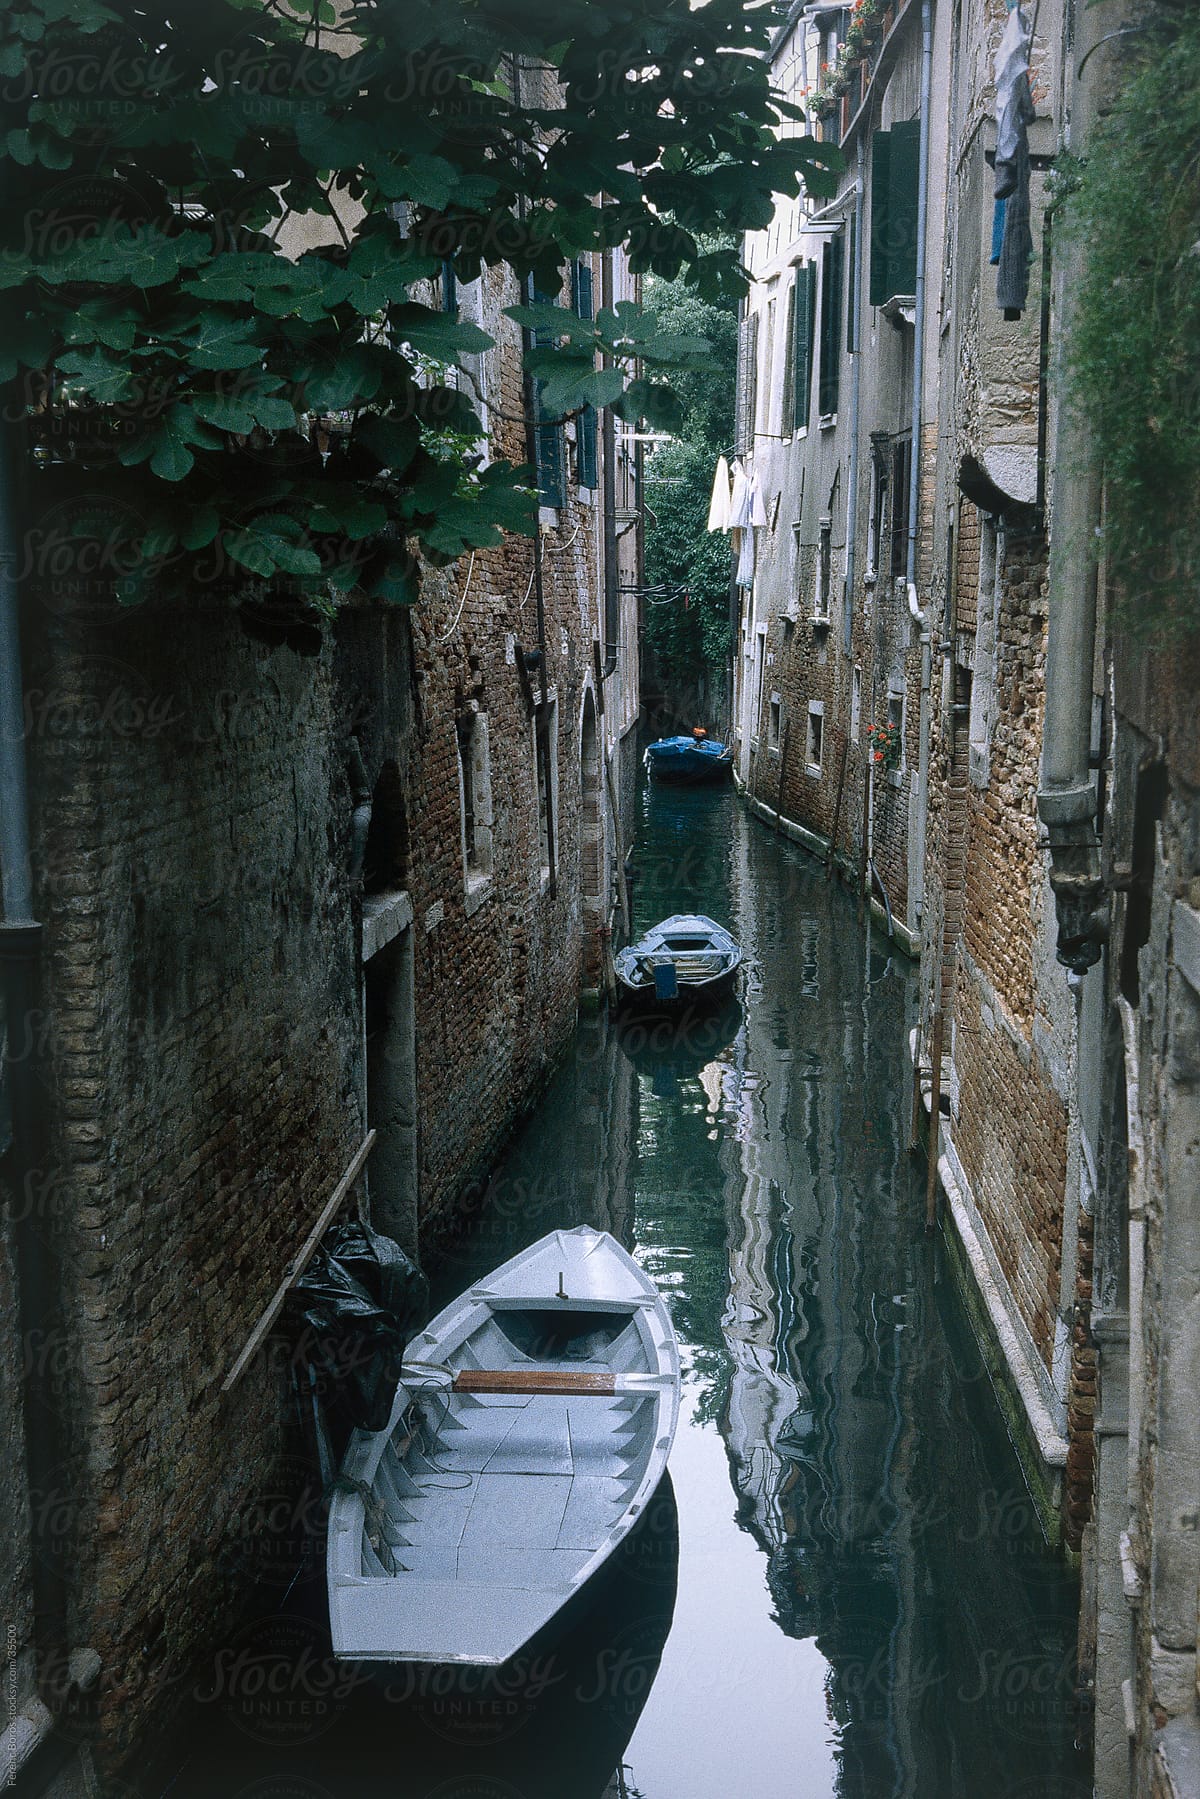 Narrow canal with flat-boats in Venice